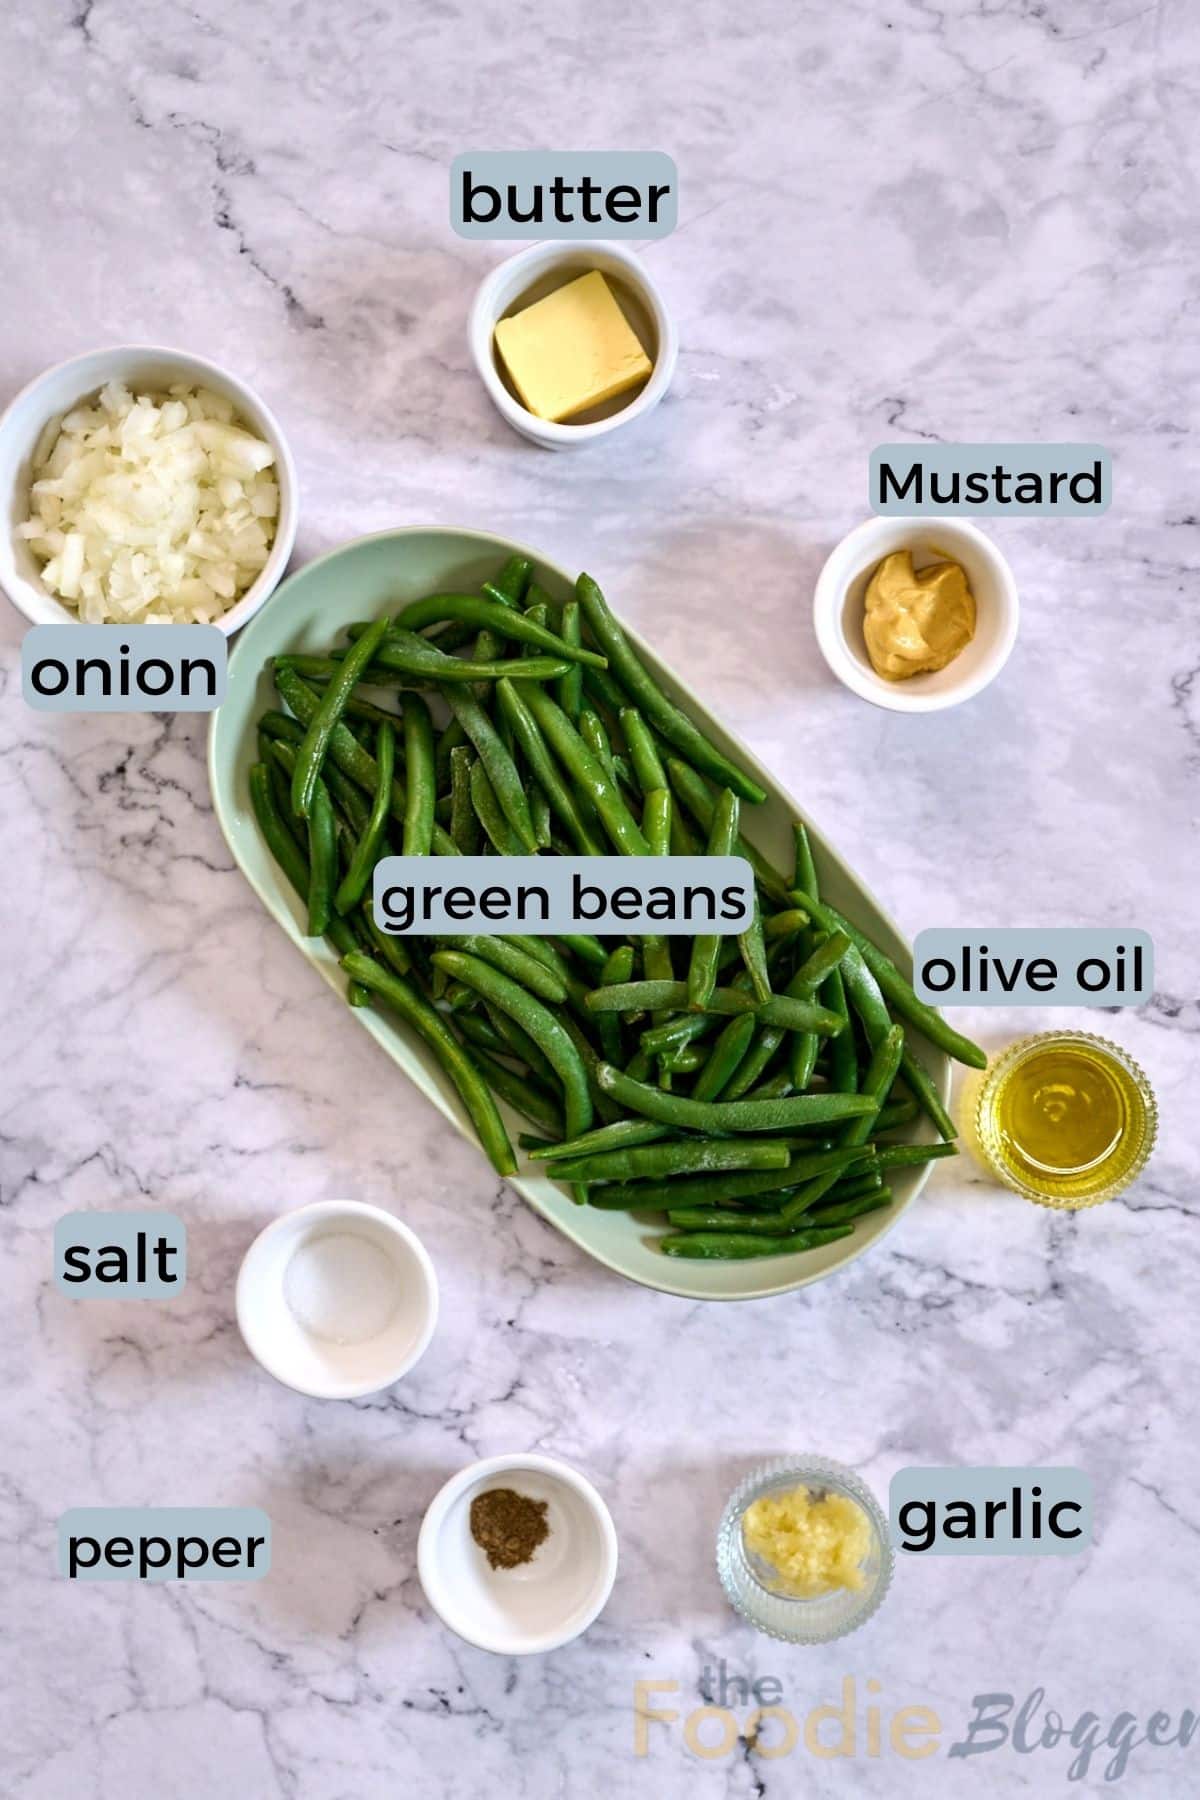 thefoodieblogger Sauteed Green Beans Recipe Ingredients